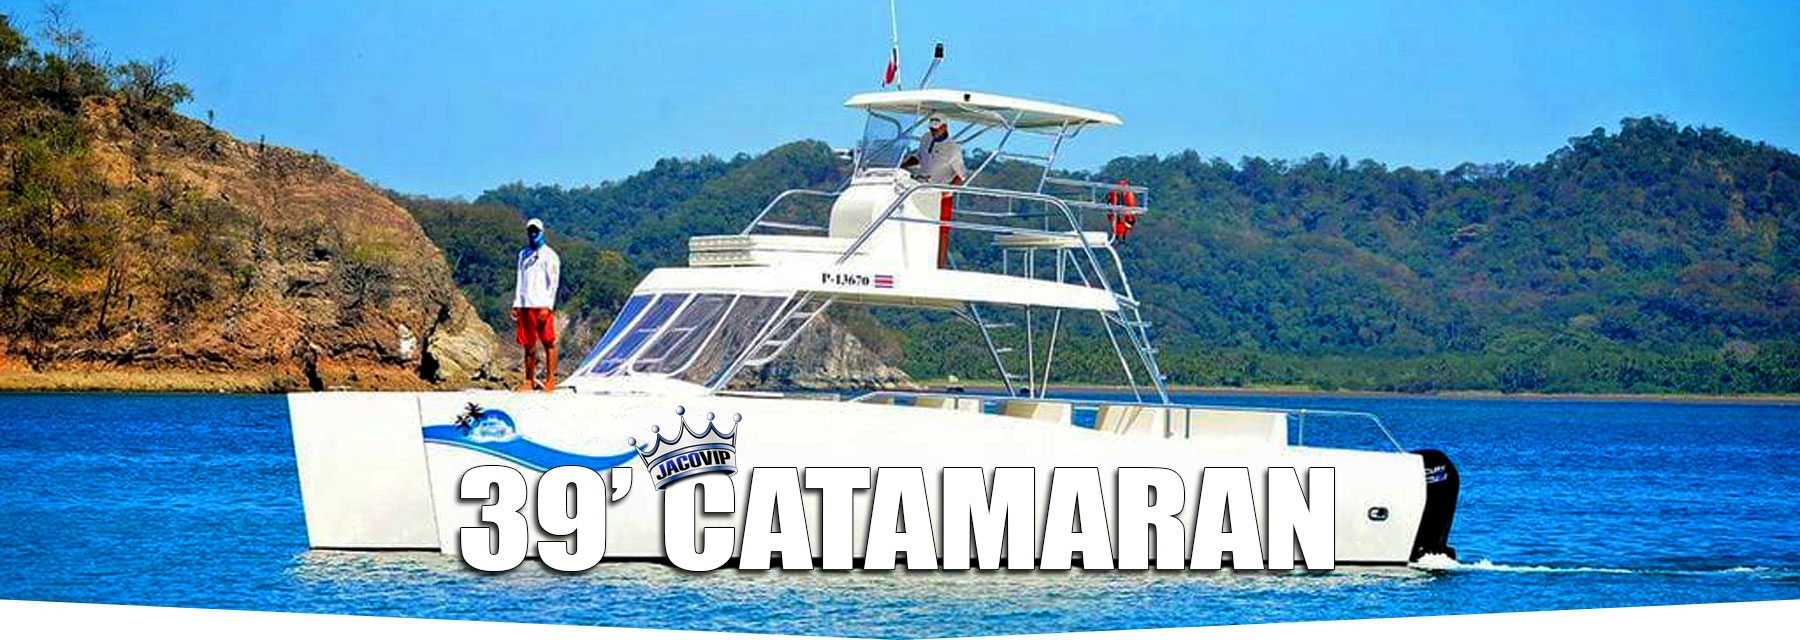 Accessible boat rental in Costa Rica